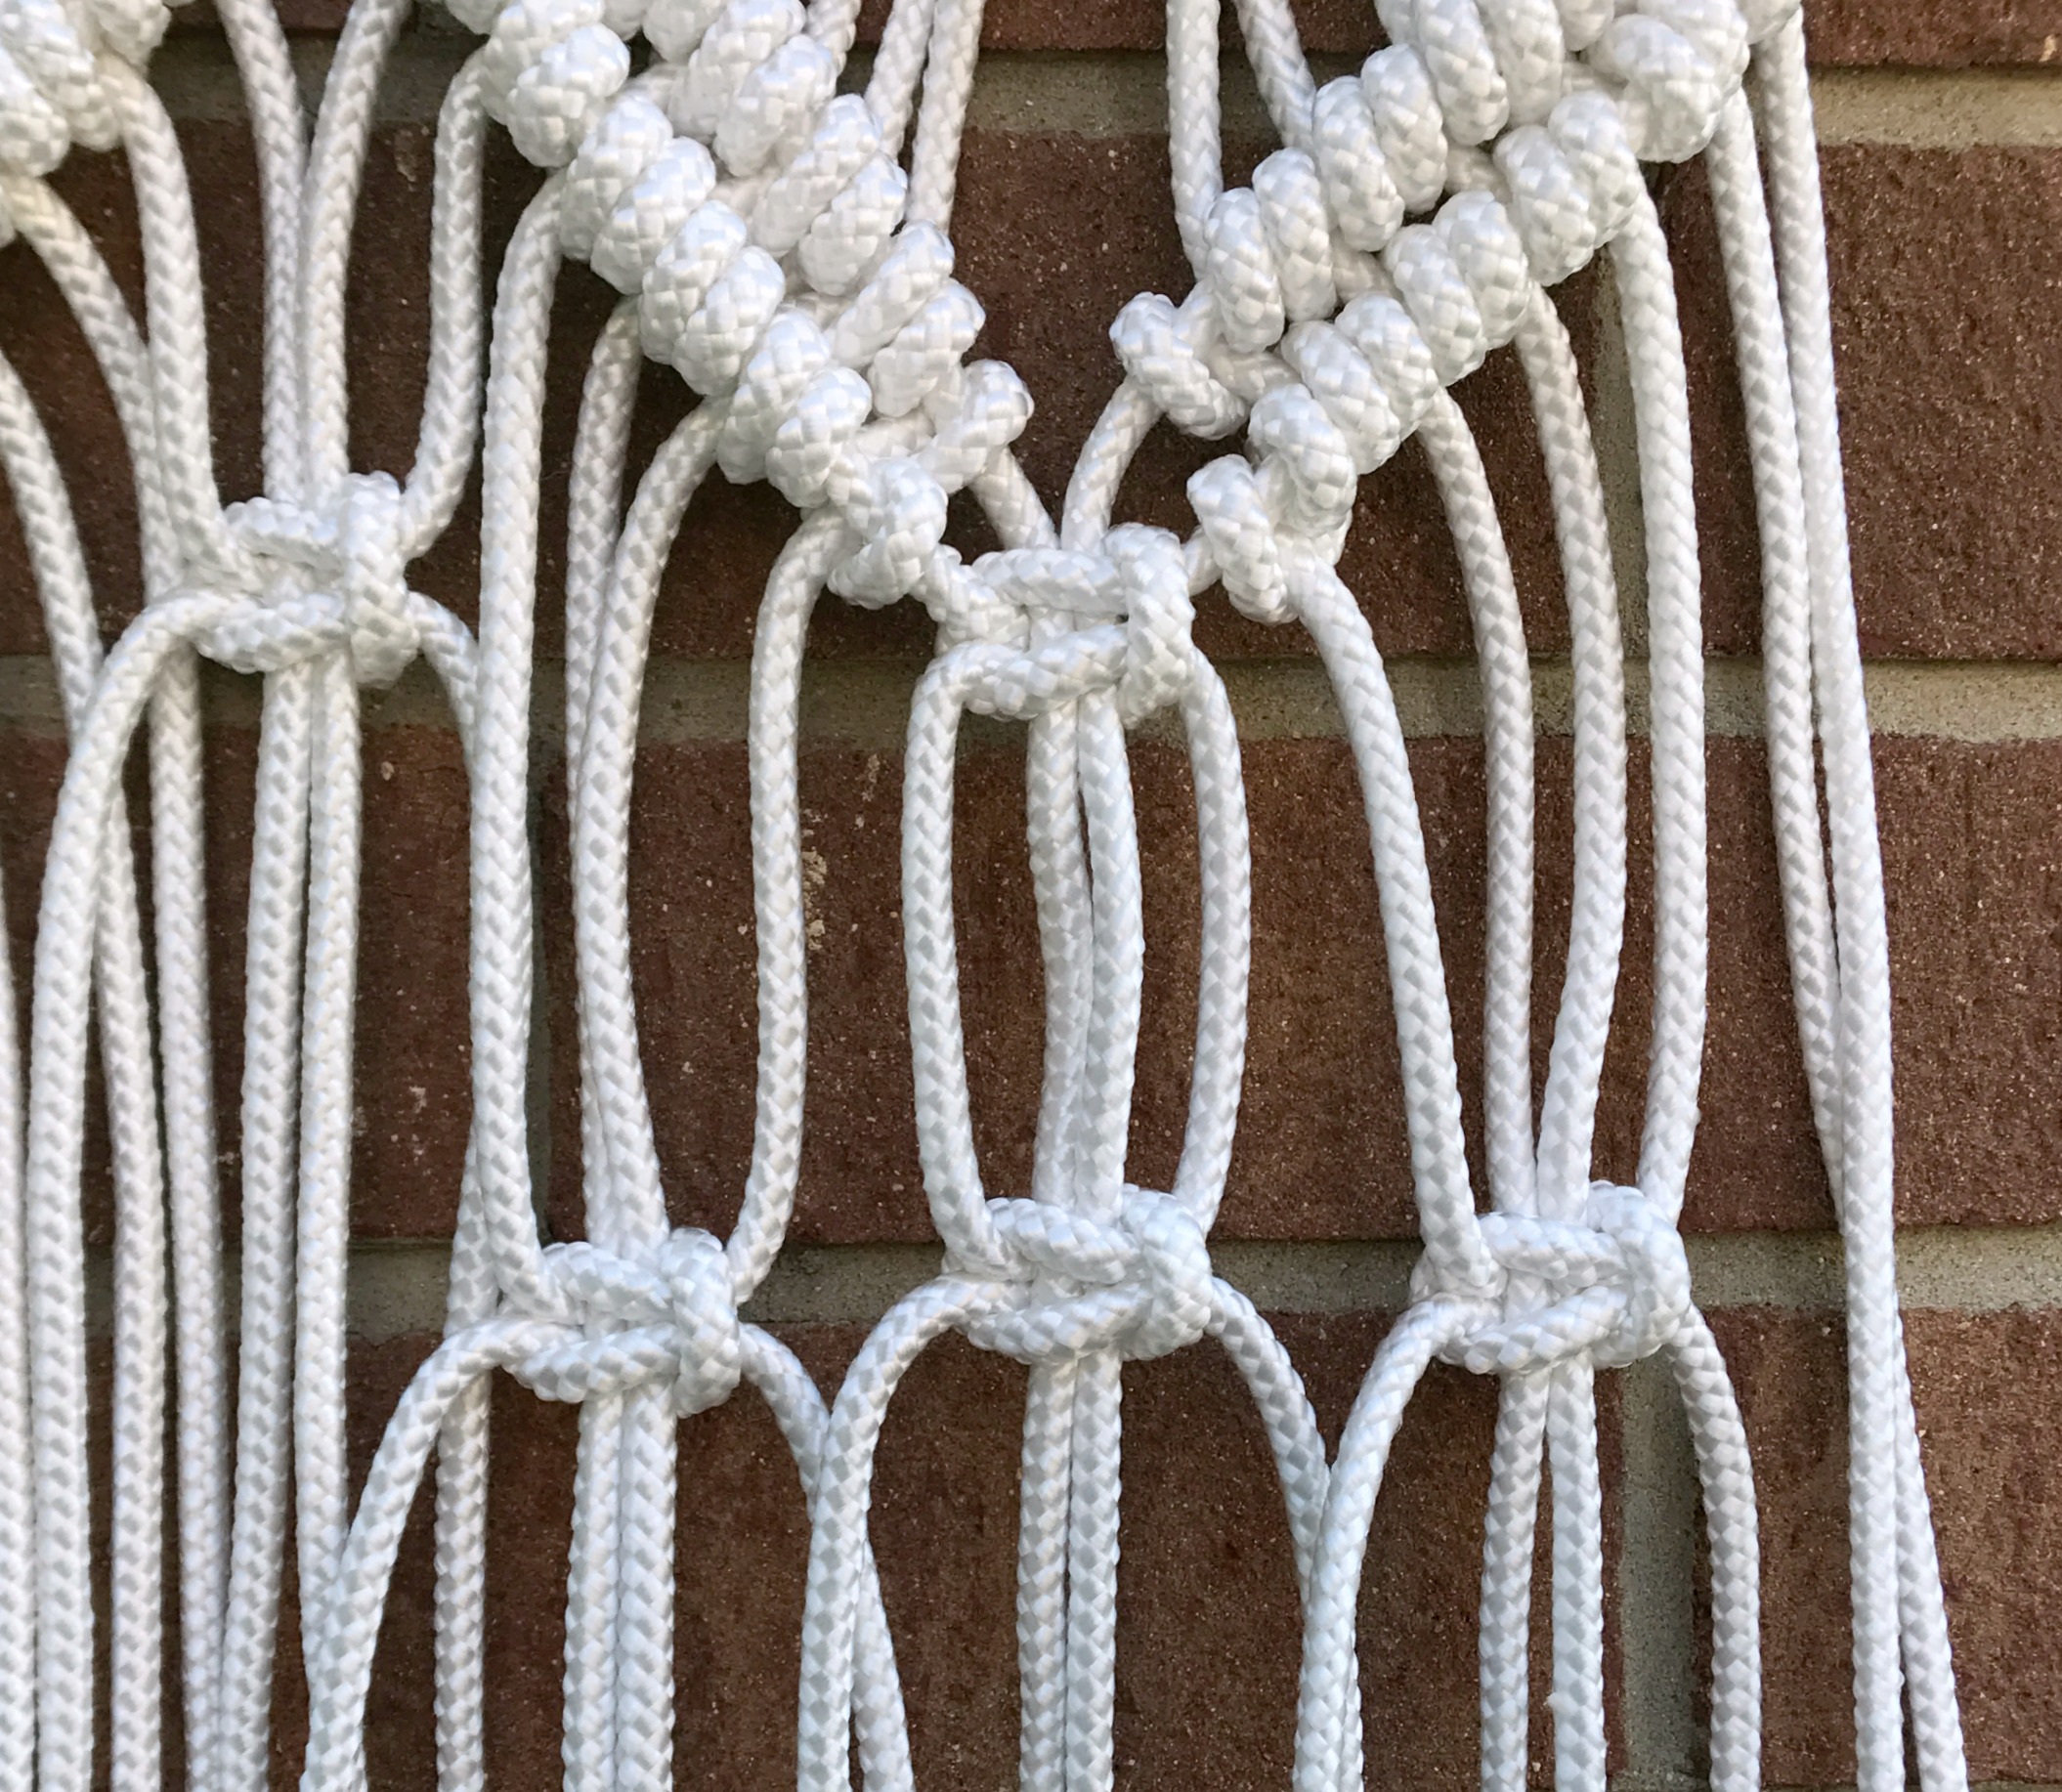 black and white macrame wall hanging - My French Twist